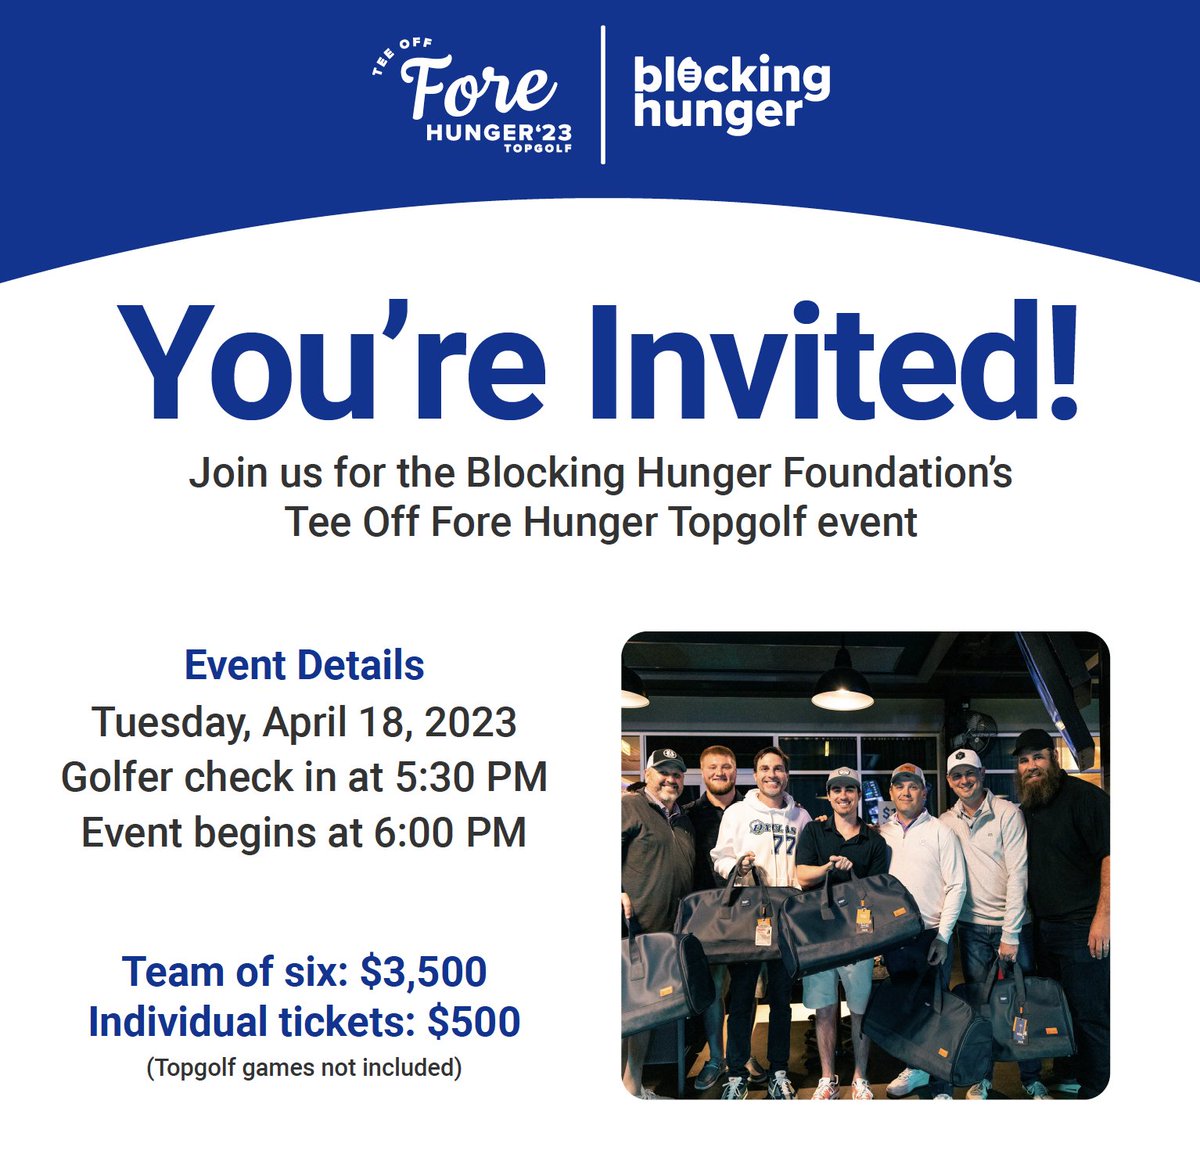 Join us for the second annual Tee Off Fore Hunger event on Tuesday, April 18! Guests will enjoy free food, drinks, games of Topgolf & take some swings with Dallas Cowboy football players! forms.gle/4r6kr3S5ovYeSF… Funds raised support our mission to #blockhunger in DFW!